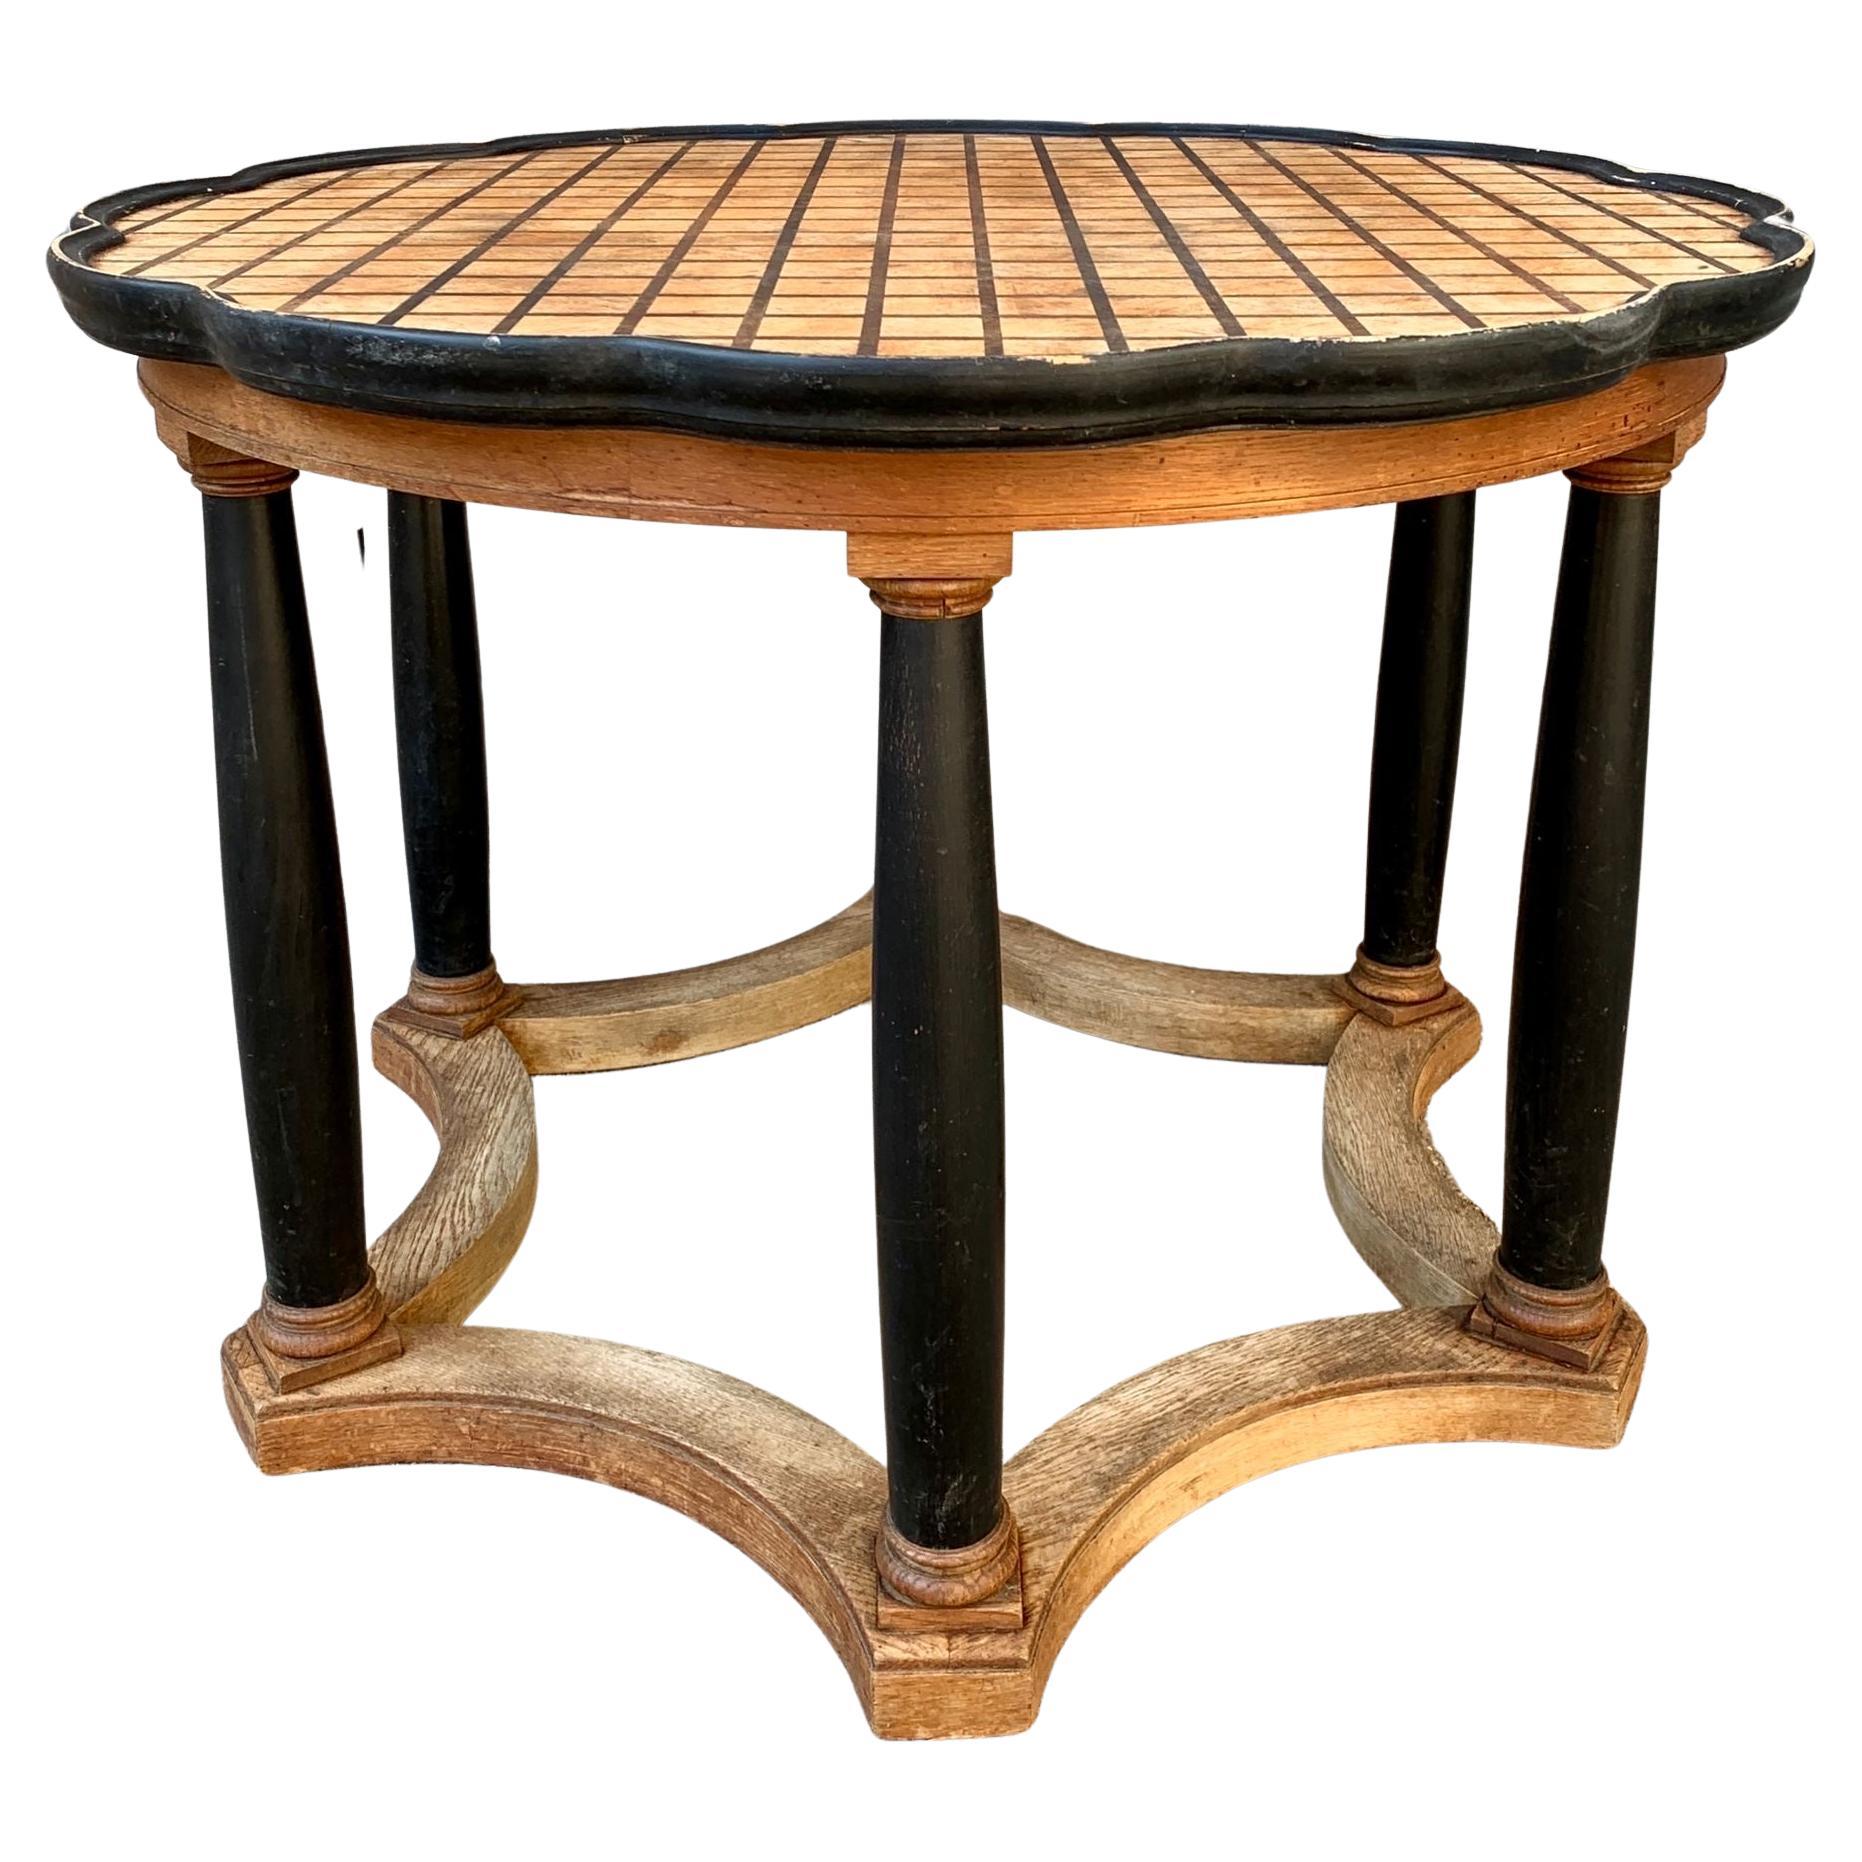 Swedish Art Deco Cocktail Table in Oak Marquetry